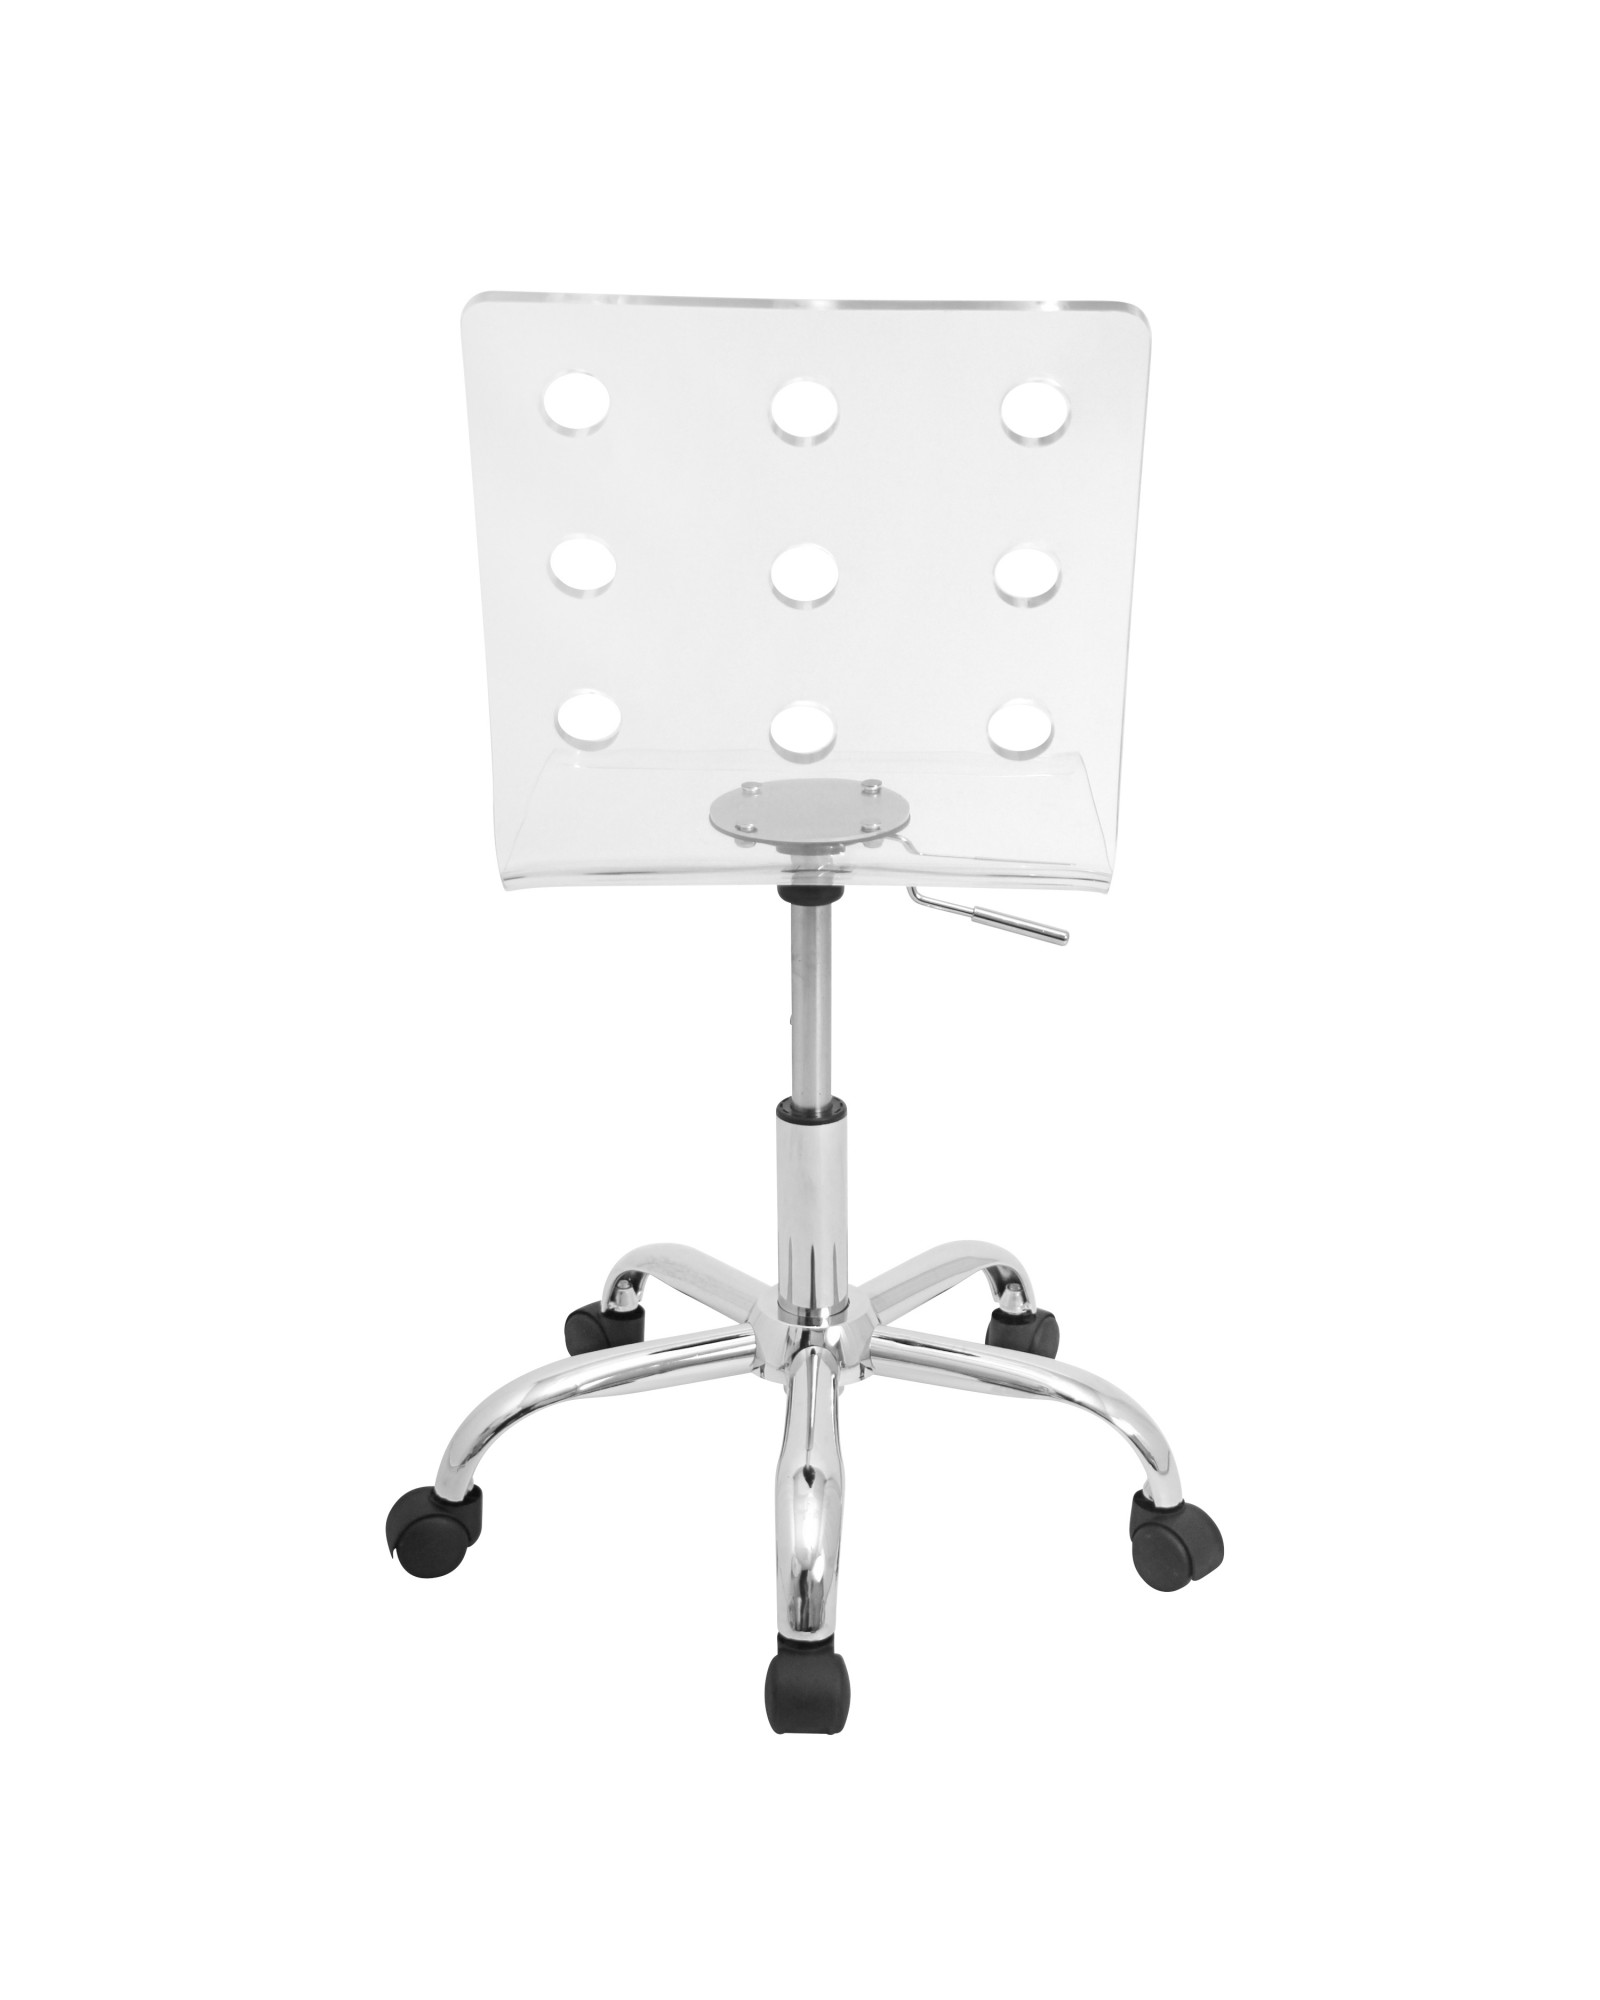 Swiss Contemporary Adjustable Office Chair with Swivel in Clear Acrylic